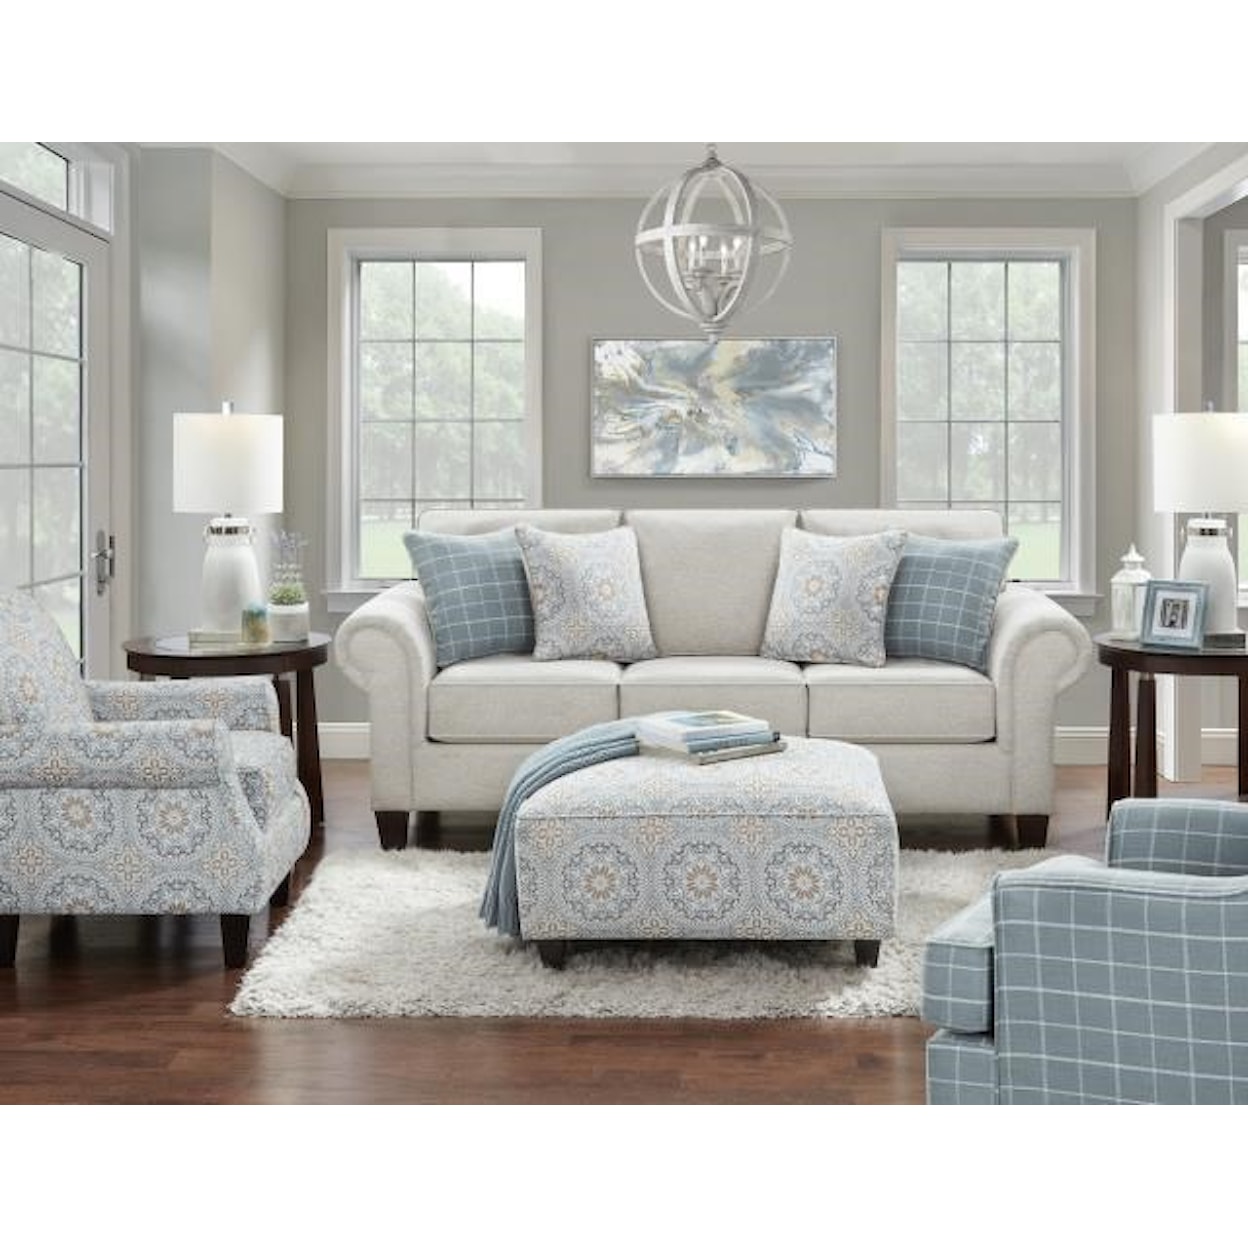 Fusion Furniture 3100 BATES NICKLE Stationary Living Room Group